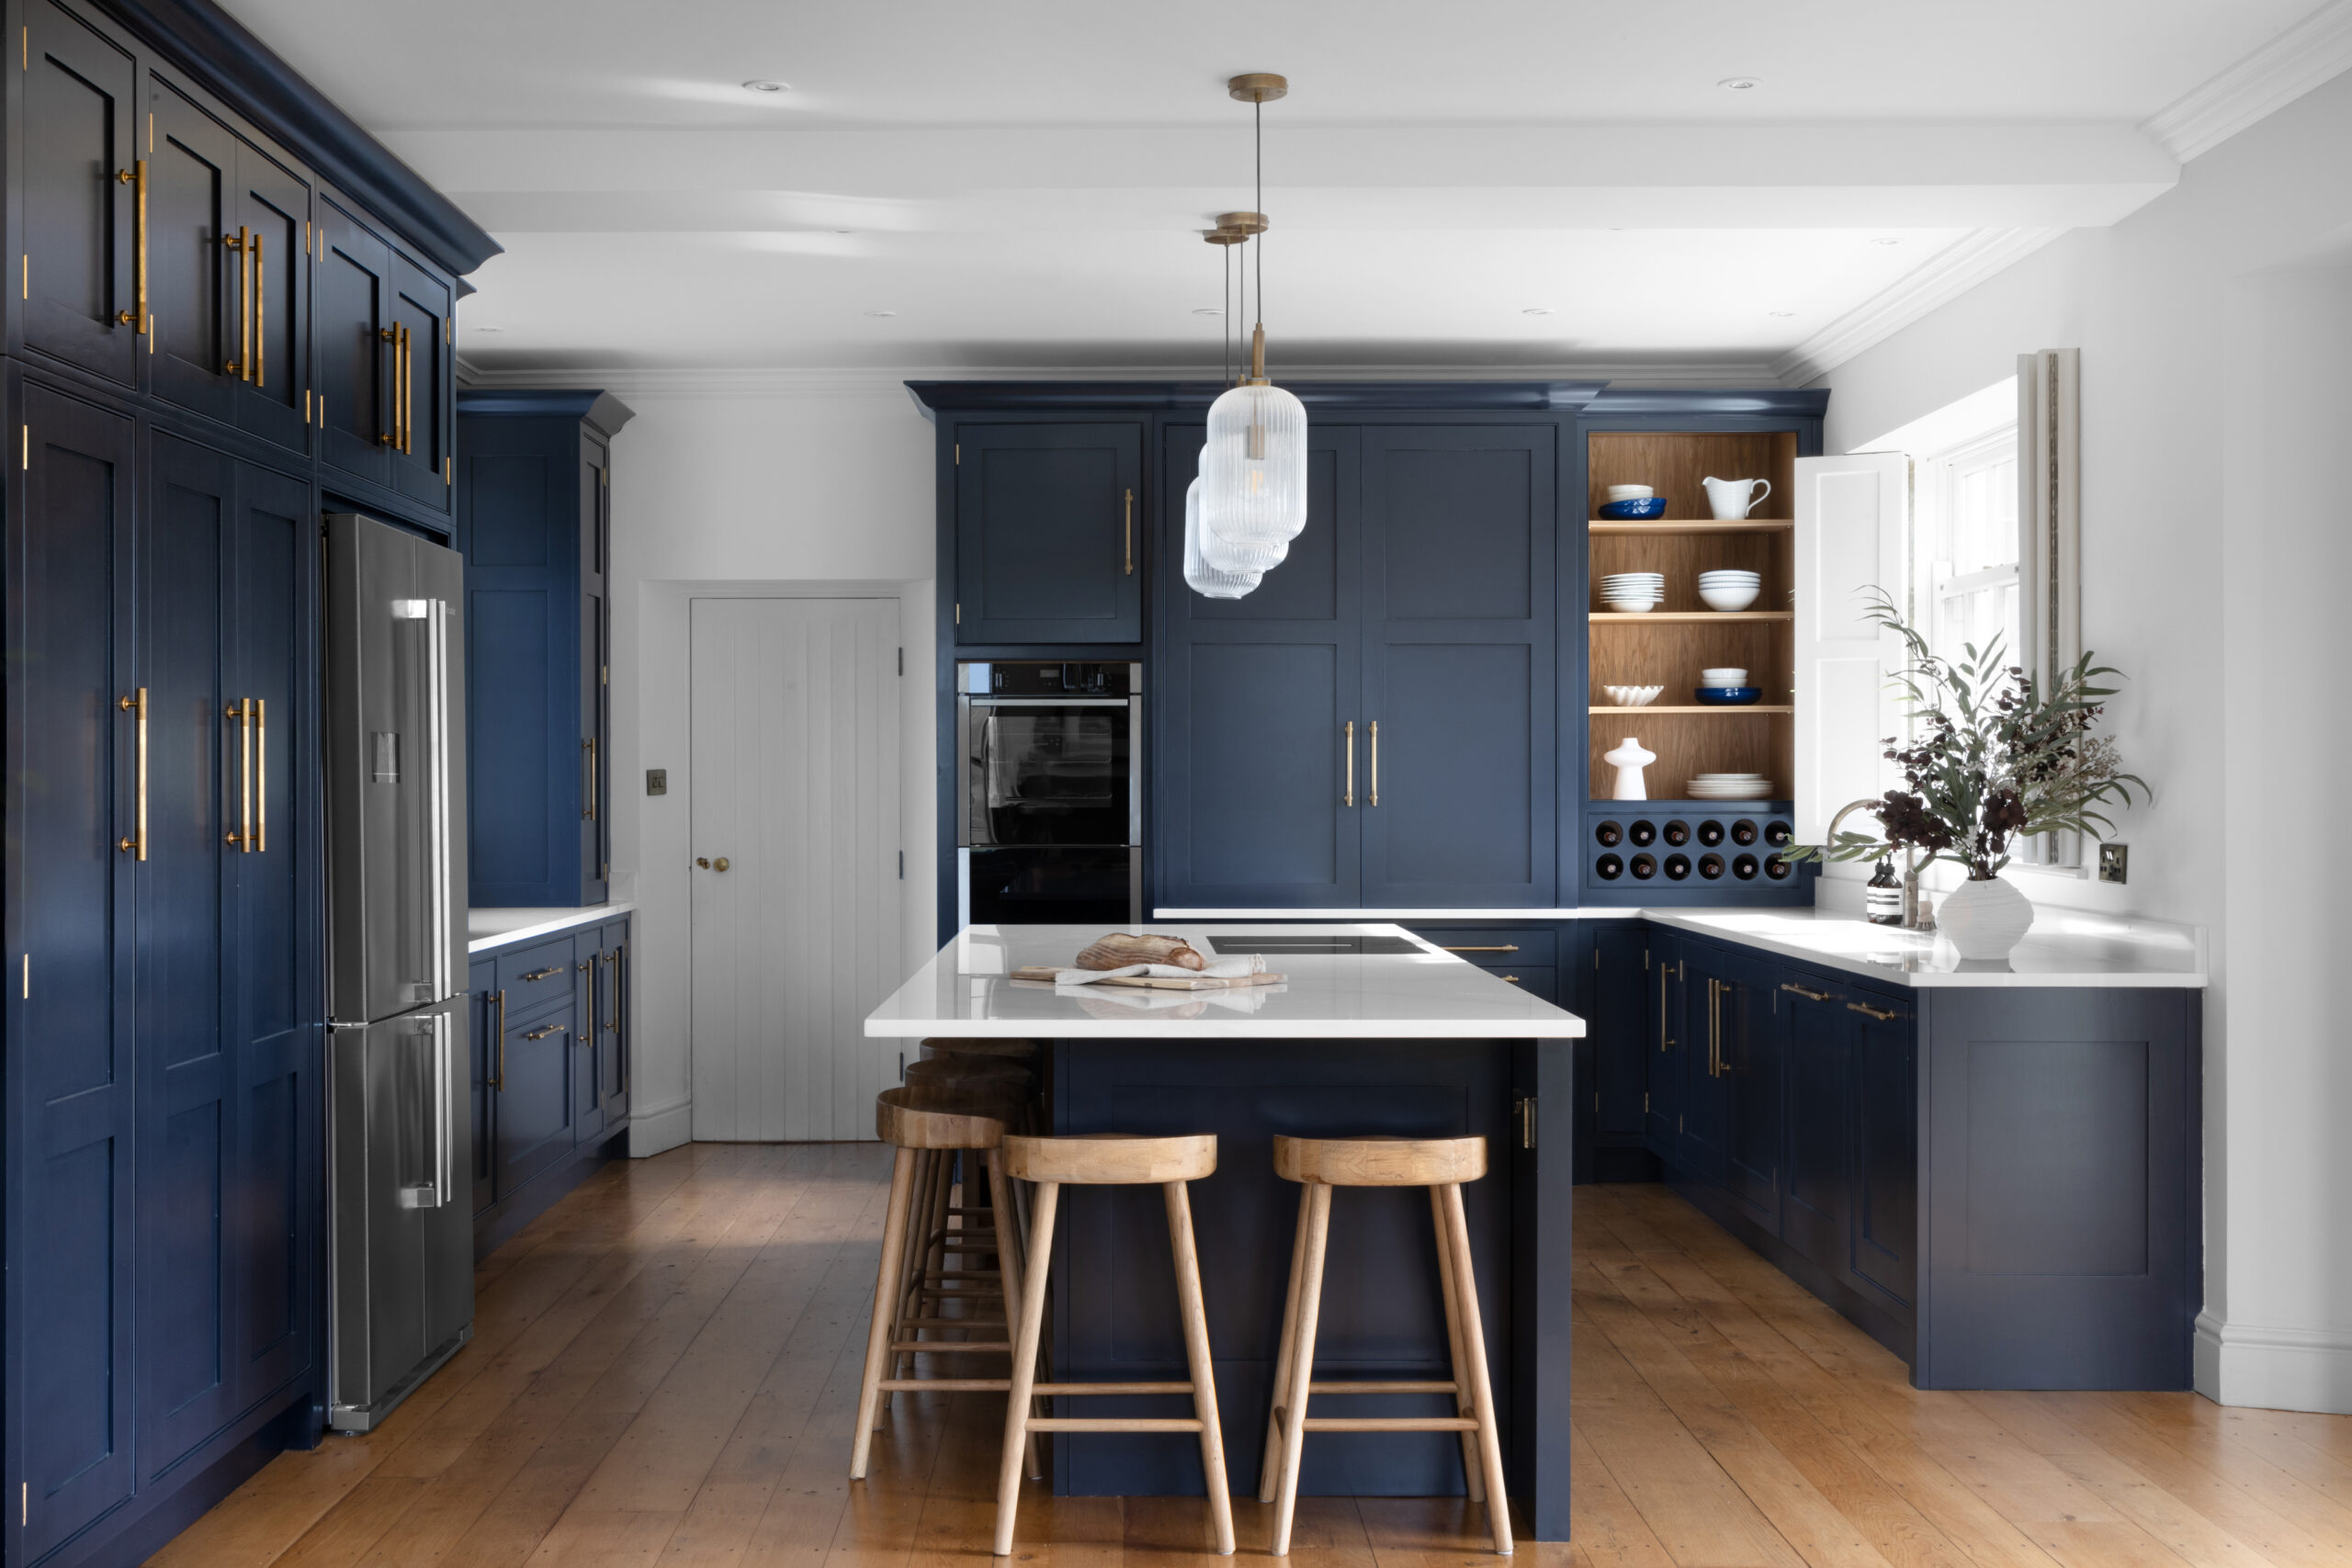 Kitchen residential interior design north wales, conwy